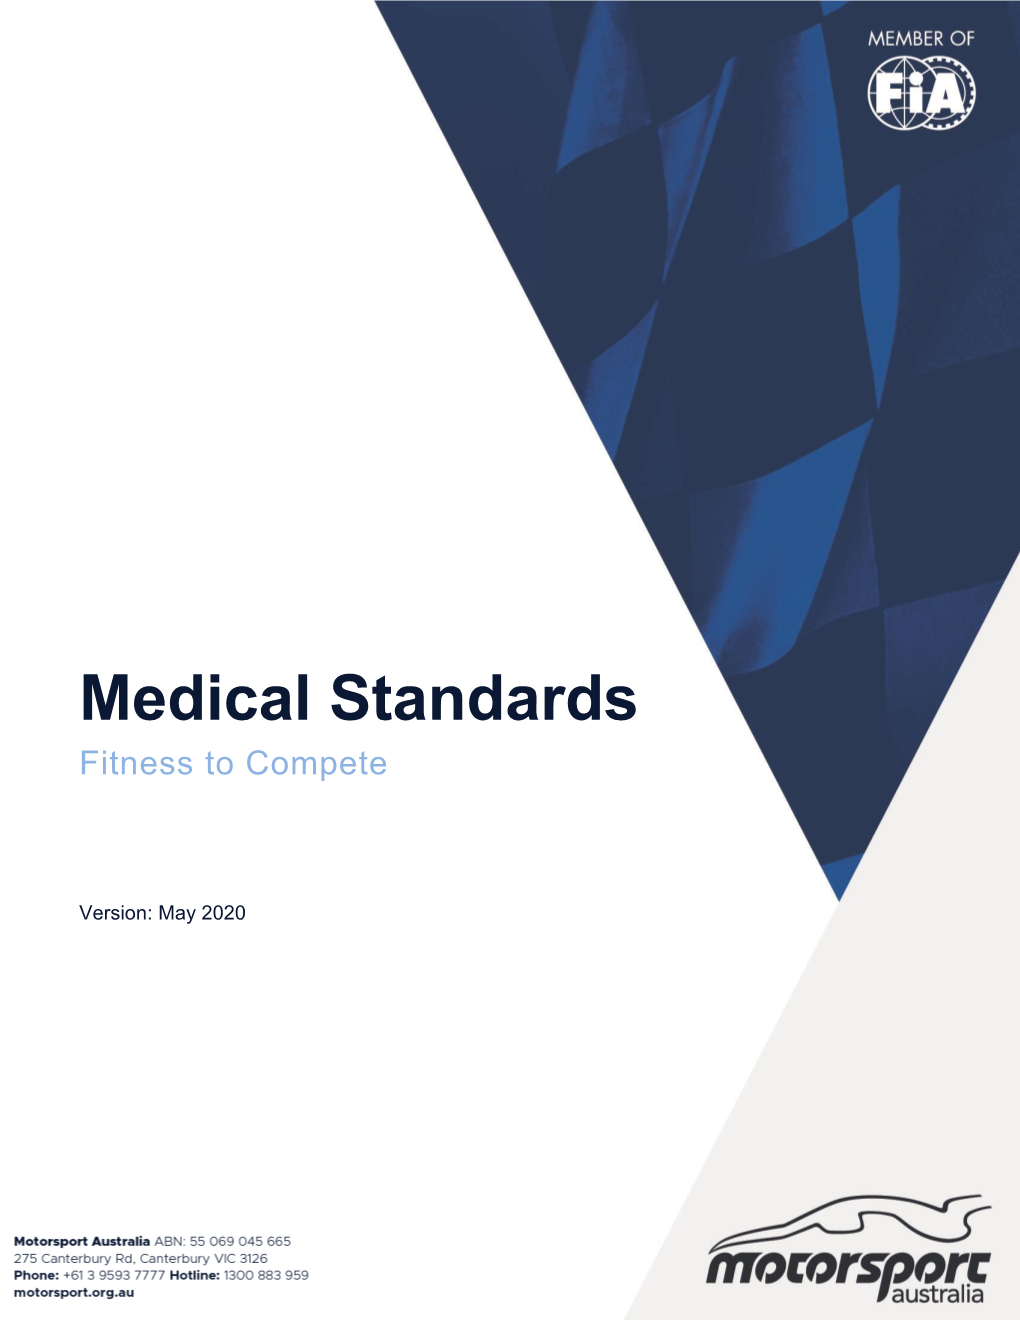 Medical Standards Fitness to Compete